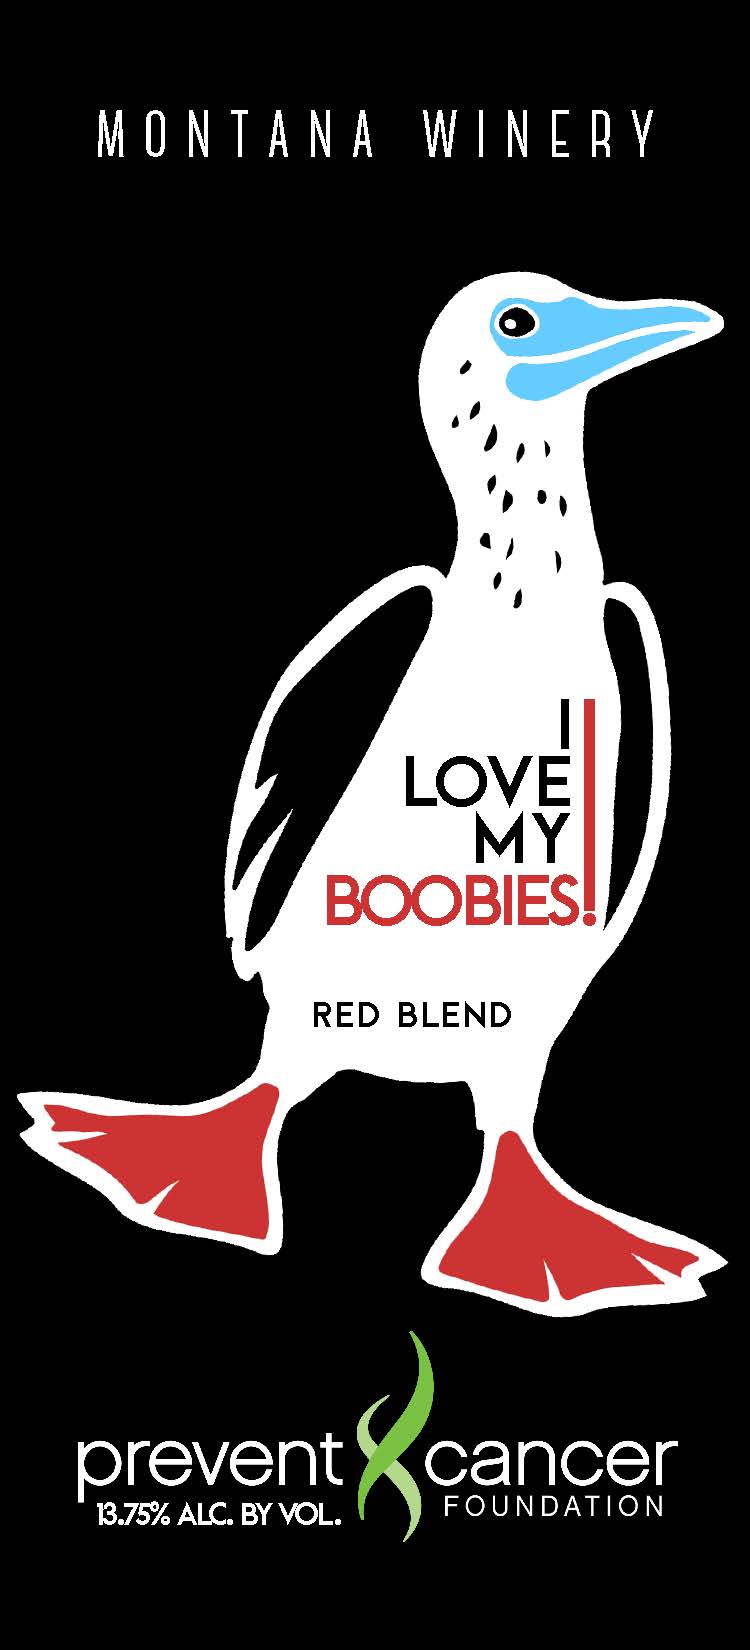 “I Love My Boobies!” Wine: A New Partnership Between Montana Winery and the Prevent Cancer Foundation